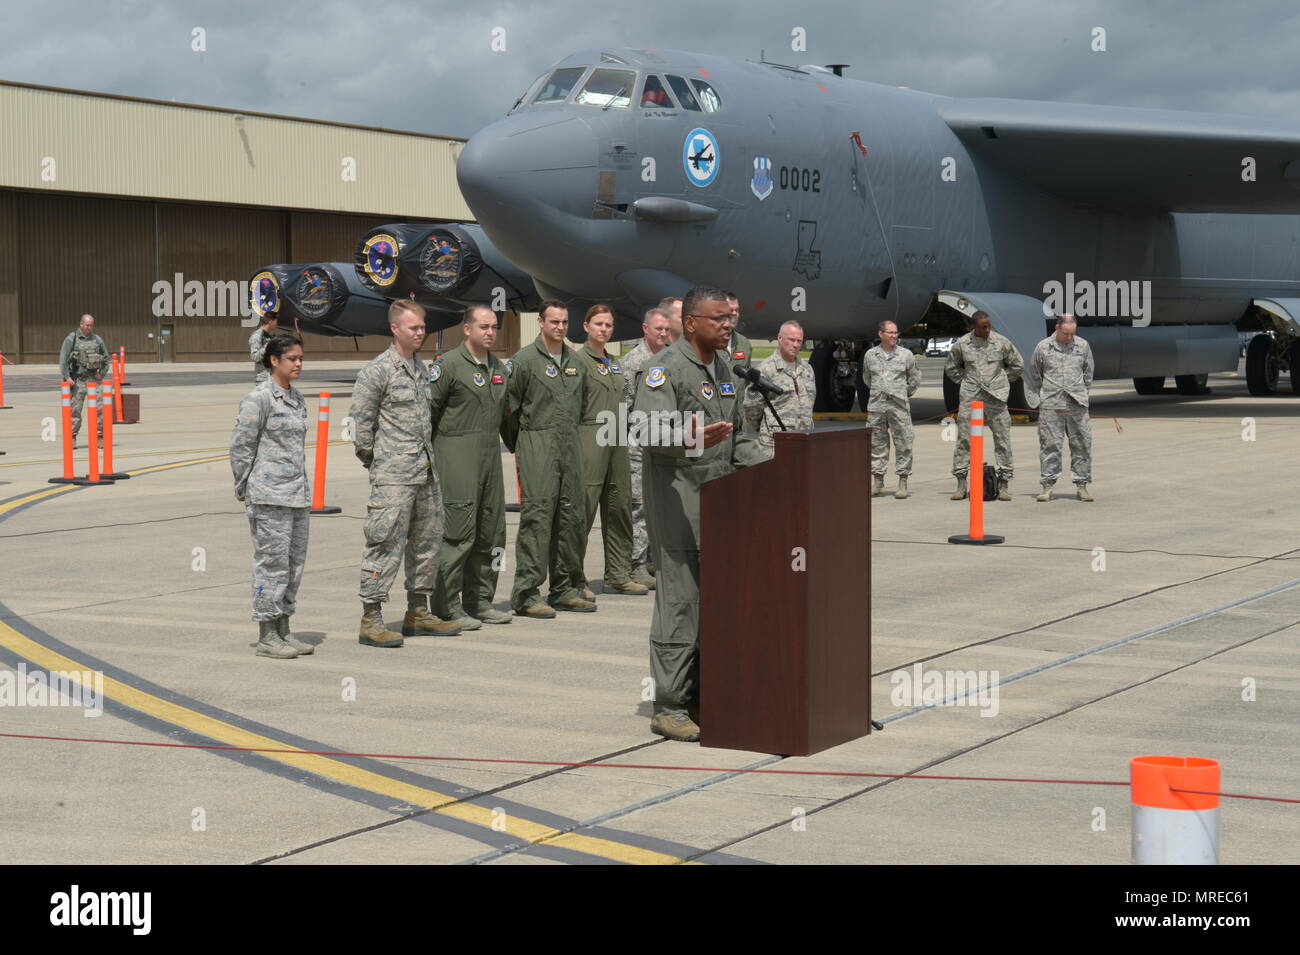 Lt. Gen. Richard Clark, 3rd Air Force commander, addresses news reporters in front of a 'tri-bomber' formation of a B-52H Stratofortress, a B-1B Lancer and a B-2 Spirit, during a media day event at RAF Fairford, U.K., June 12, 2017.  The event marked the first time in history that all three of Air Force Global Strike Command's strategic bomber aircraft simultaneously deployed to the European Theater as part of bomber assurance and deterrence operations. The forward presence of bomber aircraft and Airmen assists in maintaining high readiness for global reach capabilities. (U.S. Air Force photo  Stock Photo